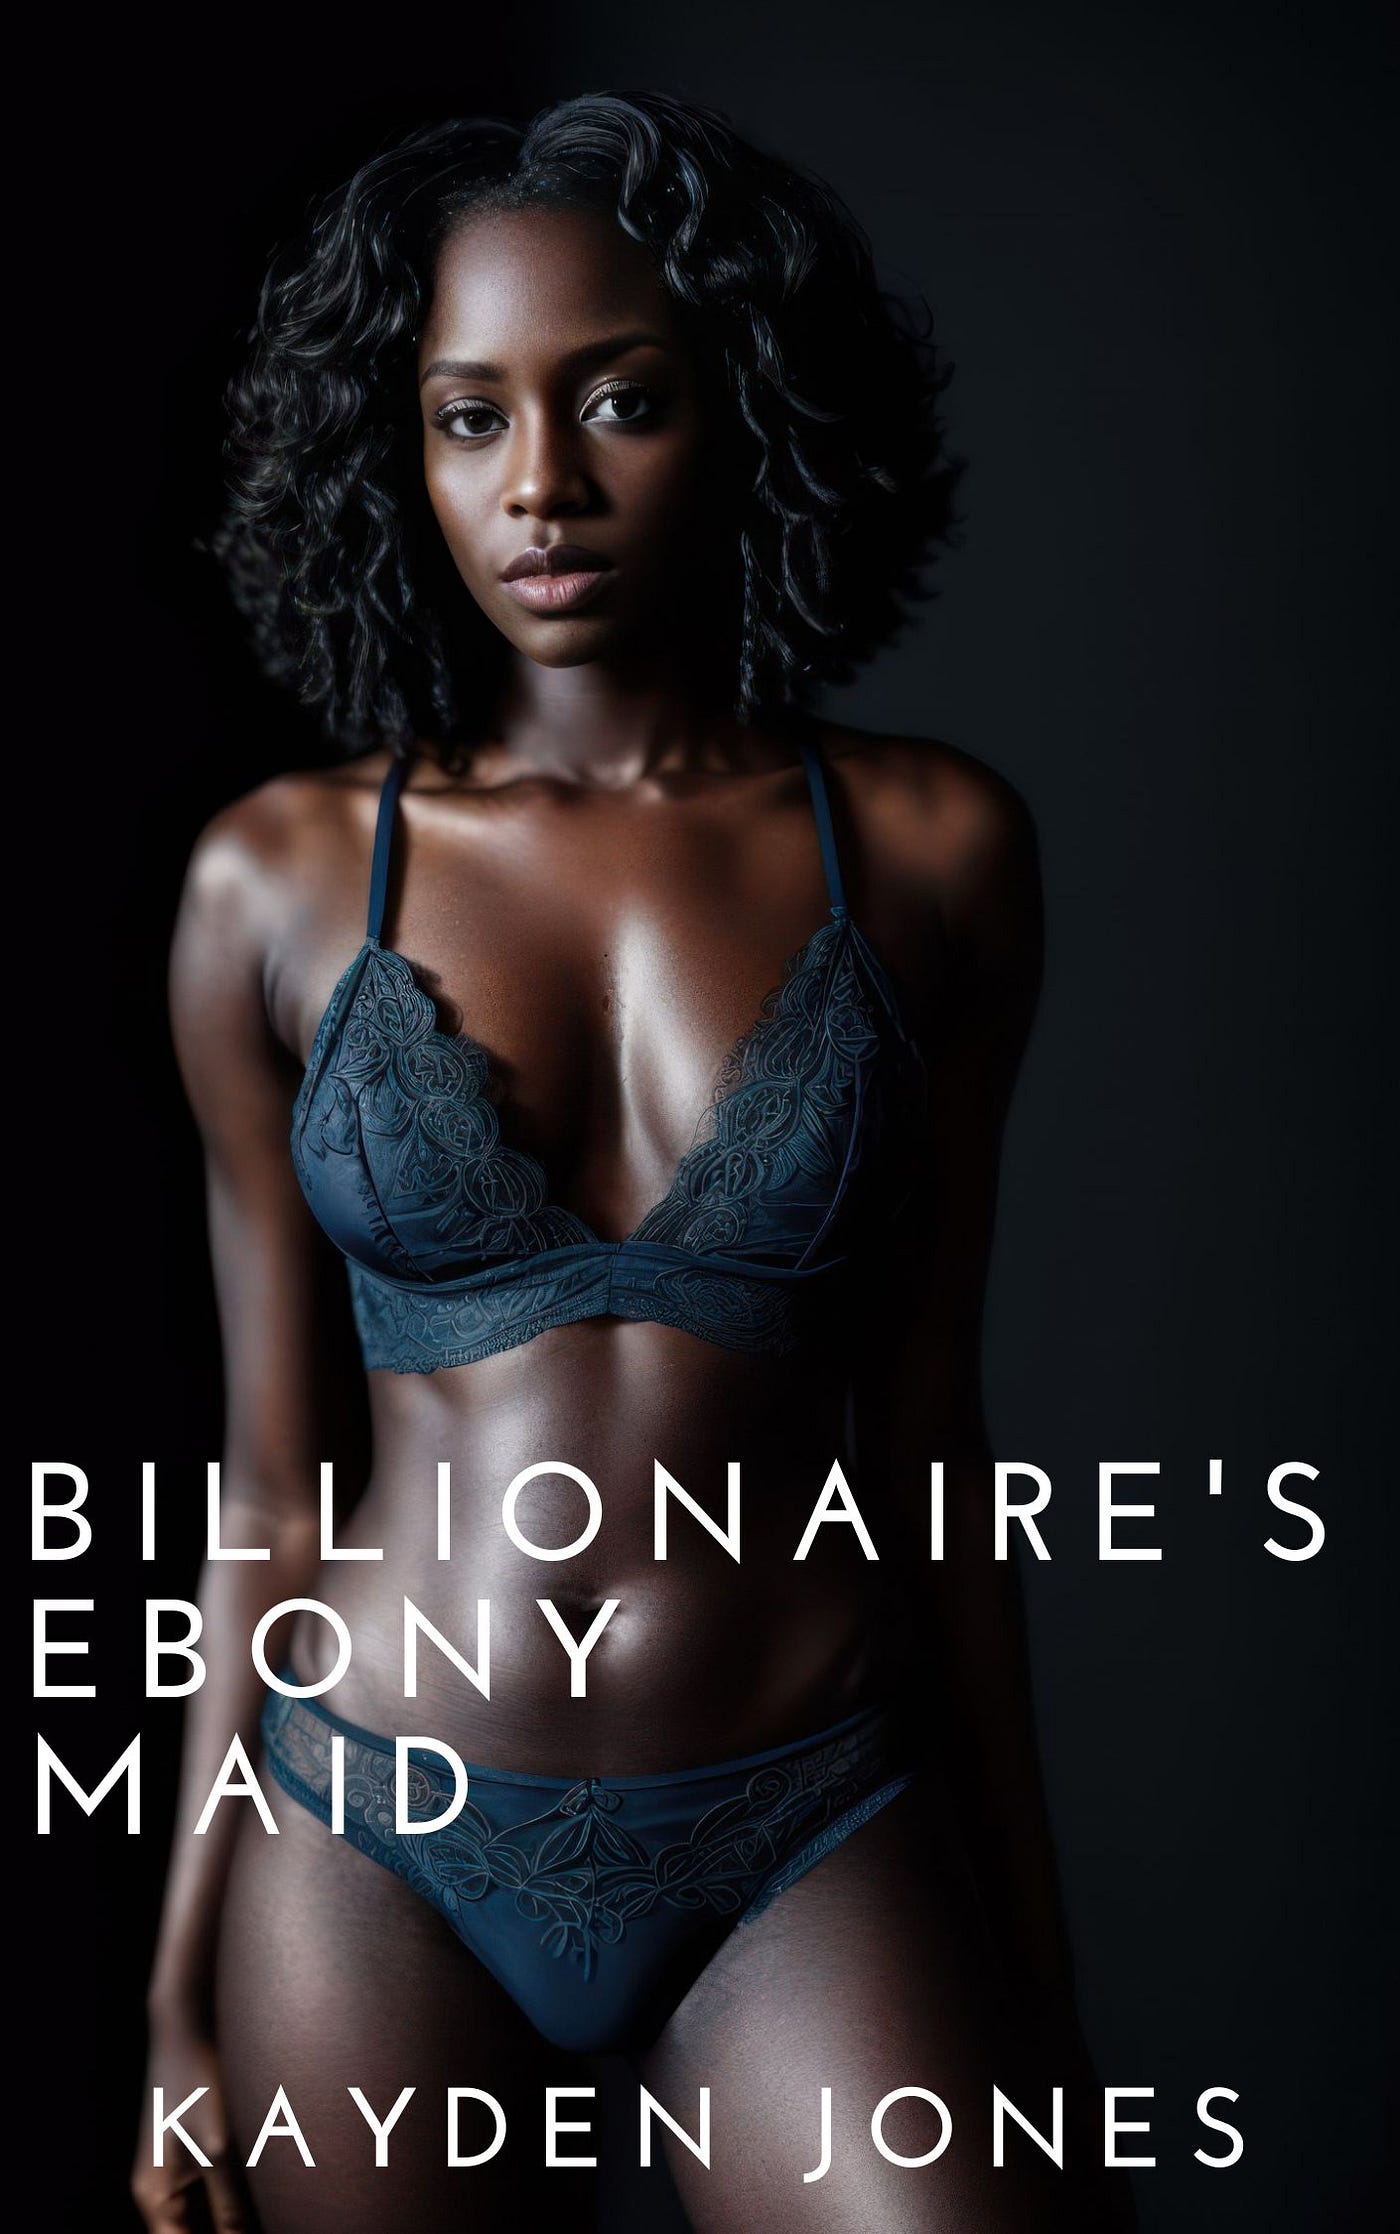 Billionaires Ebony Maid. My boss is the best picture photo photo